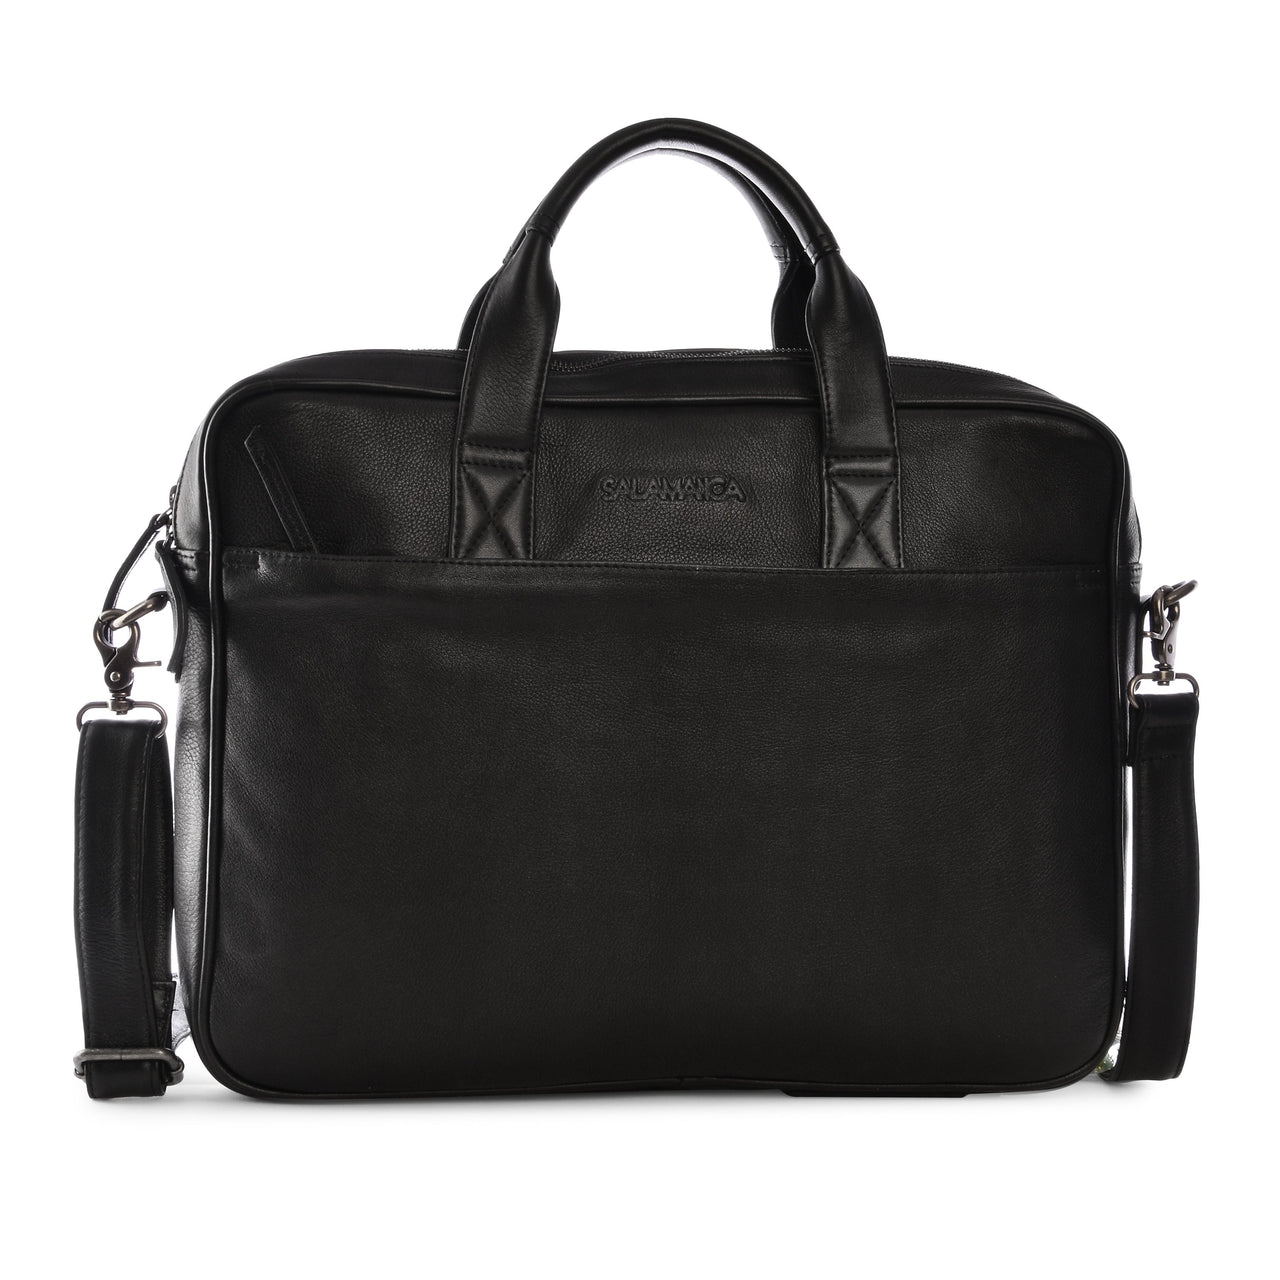 Haskell Business Bag - Black - Laptop Bags